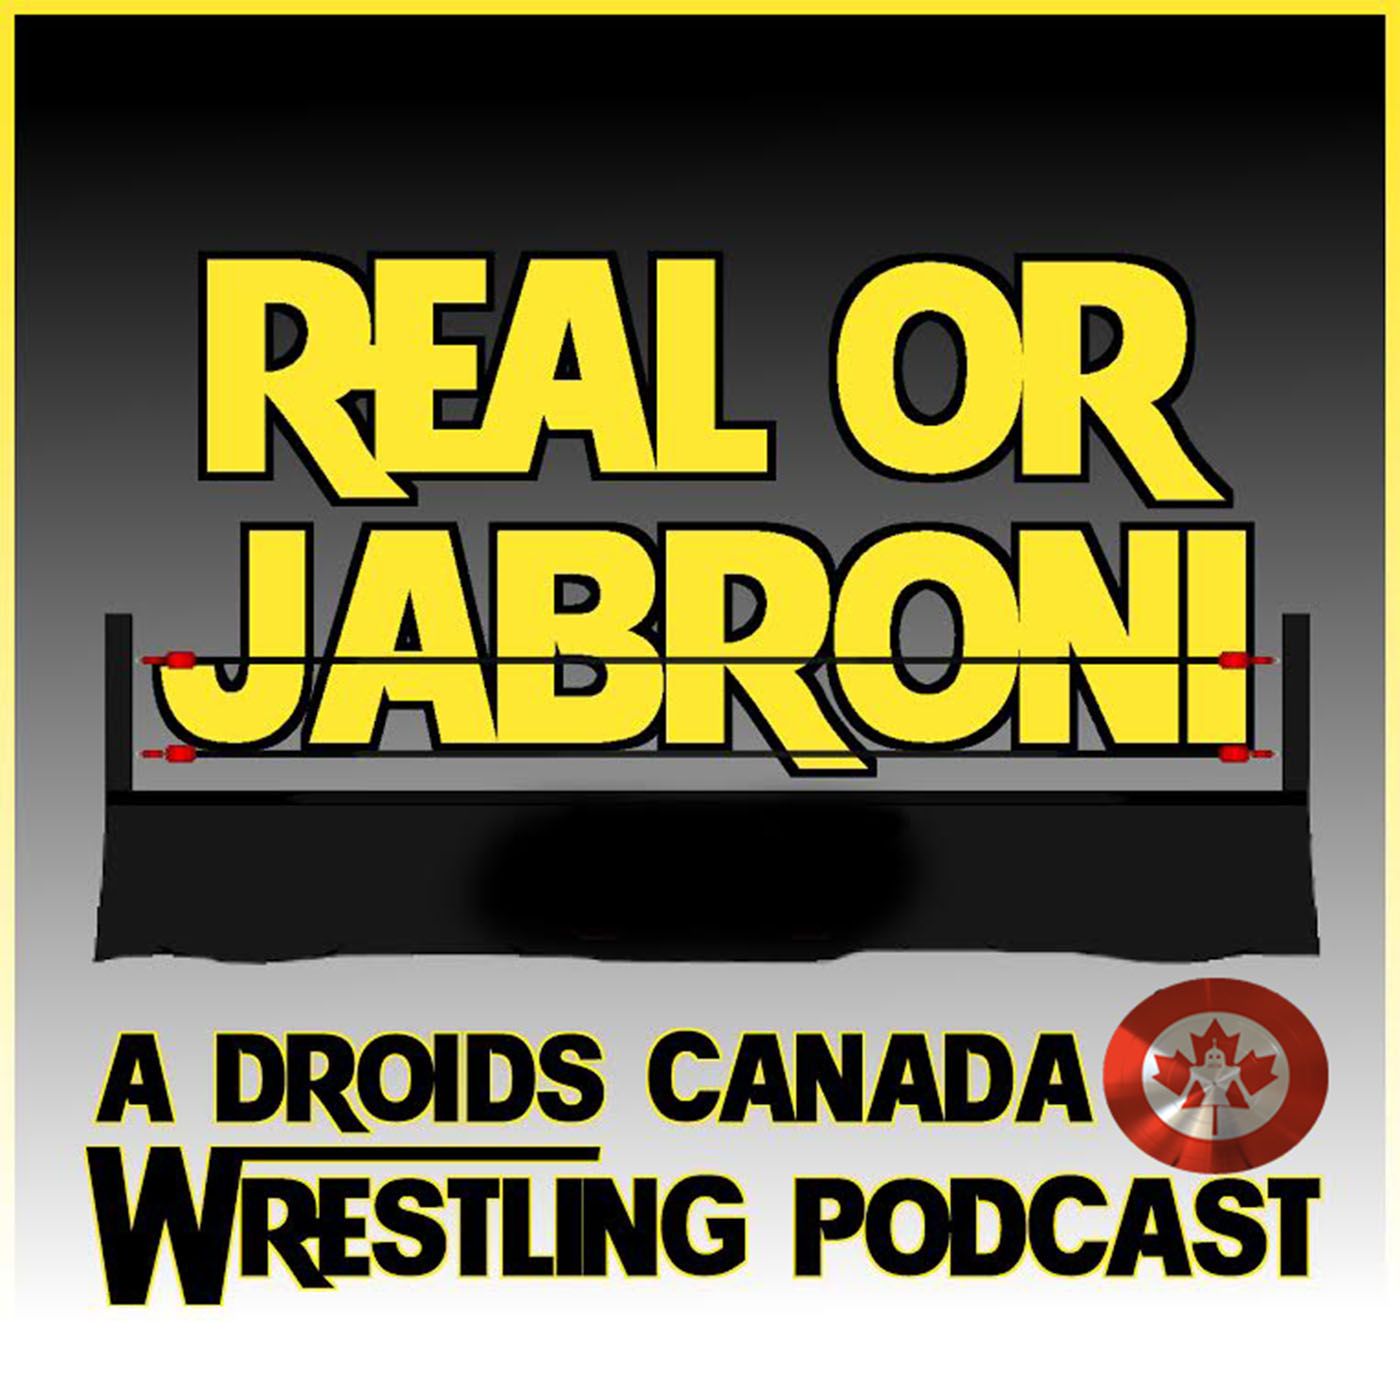 Real Or Jabroni Wrasslin' Podcast